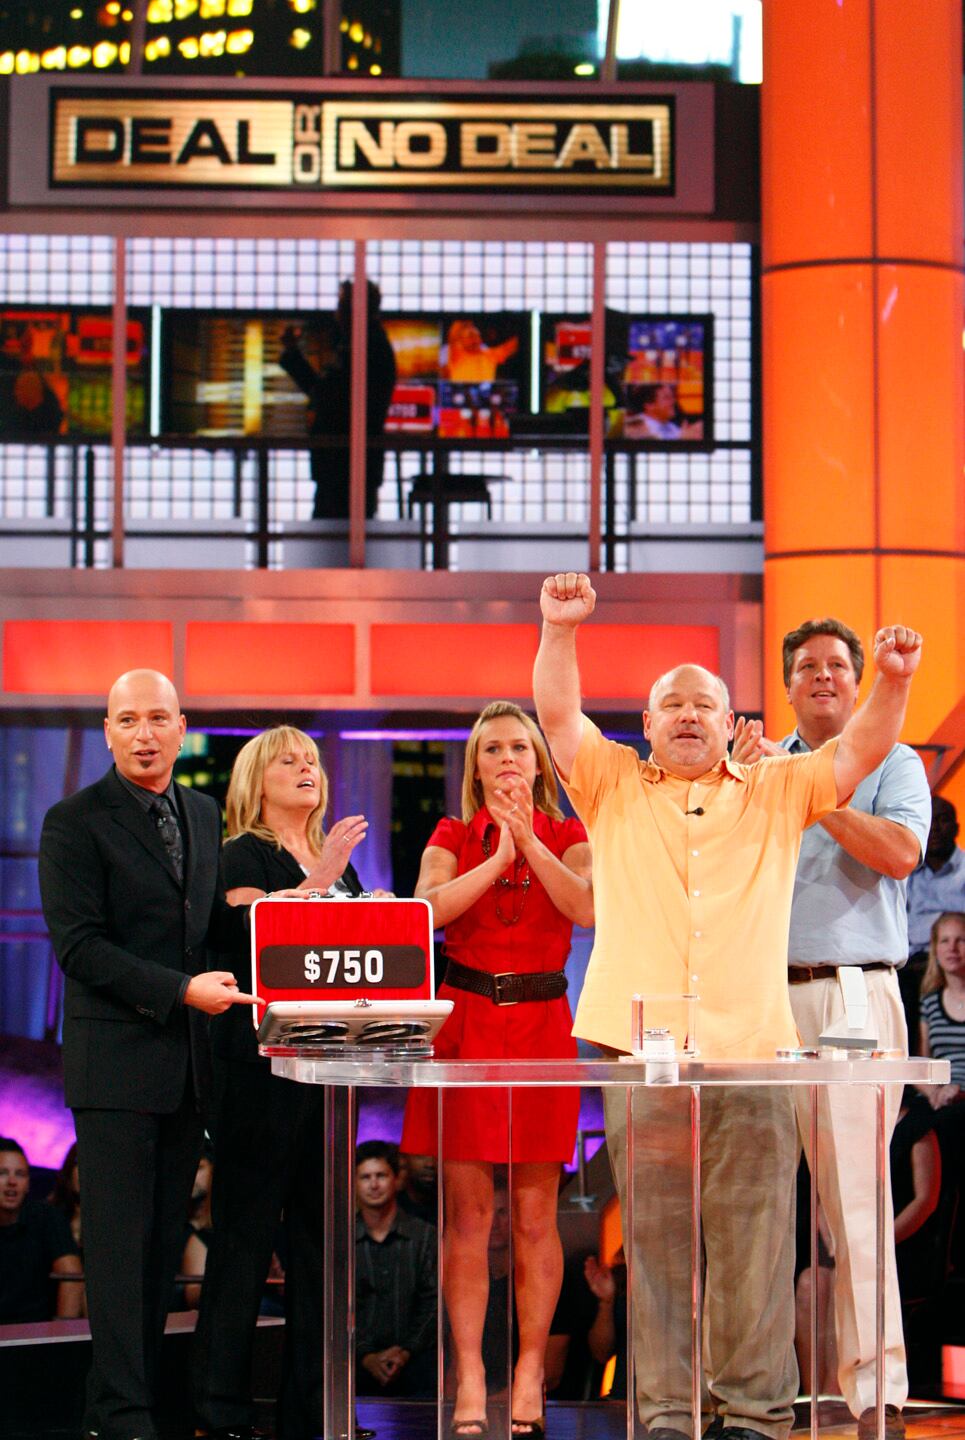 deal or no deal - photo #6